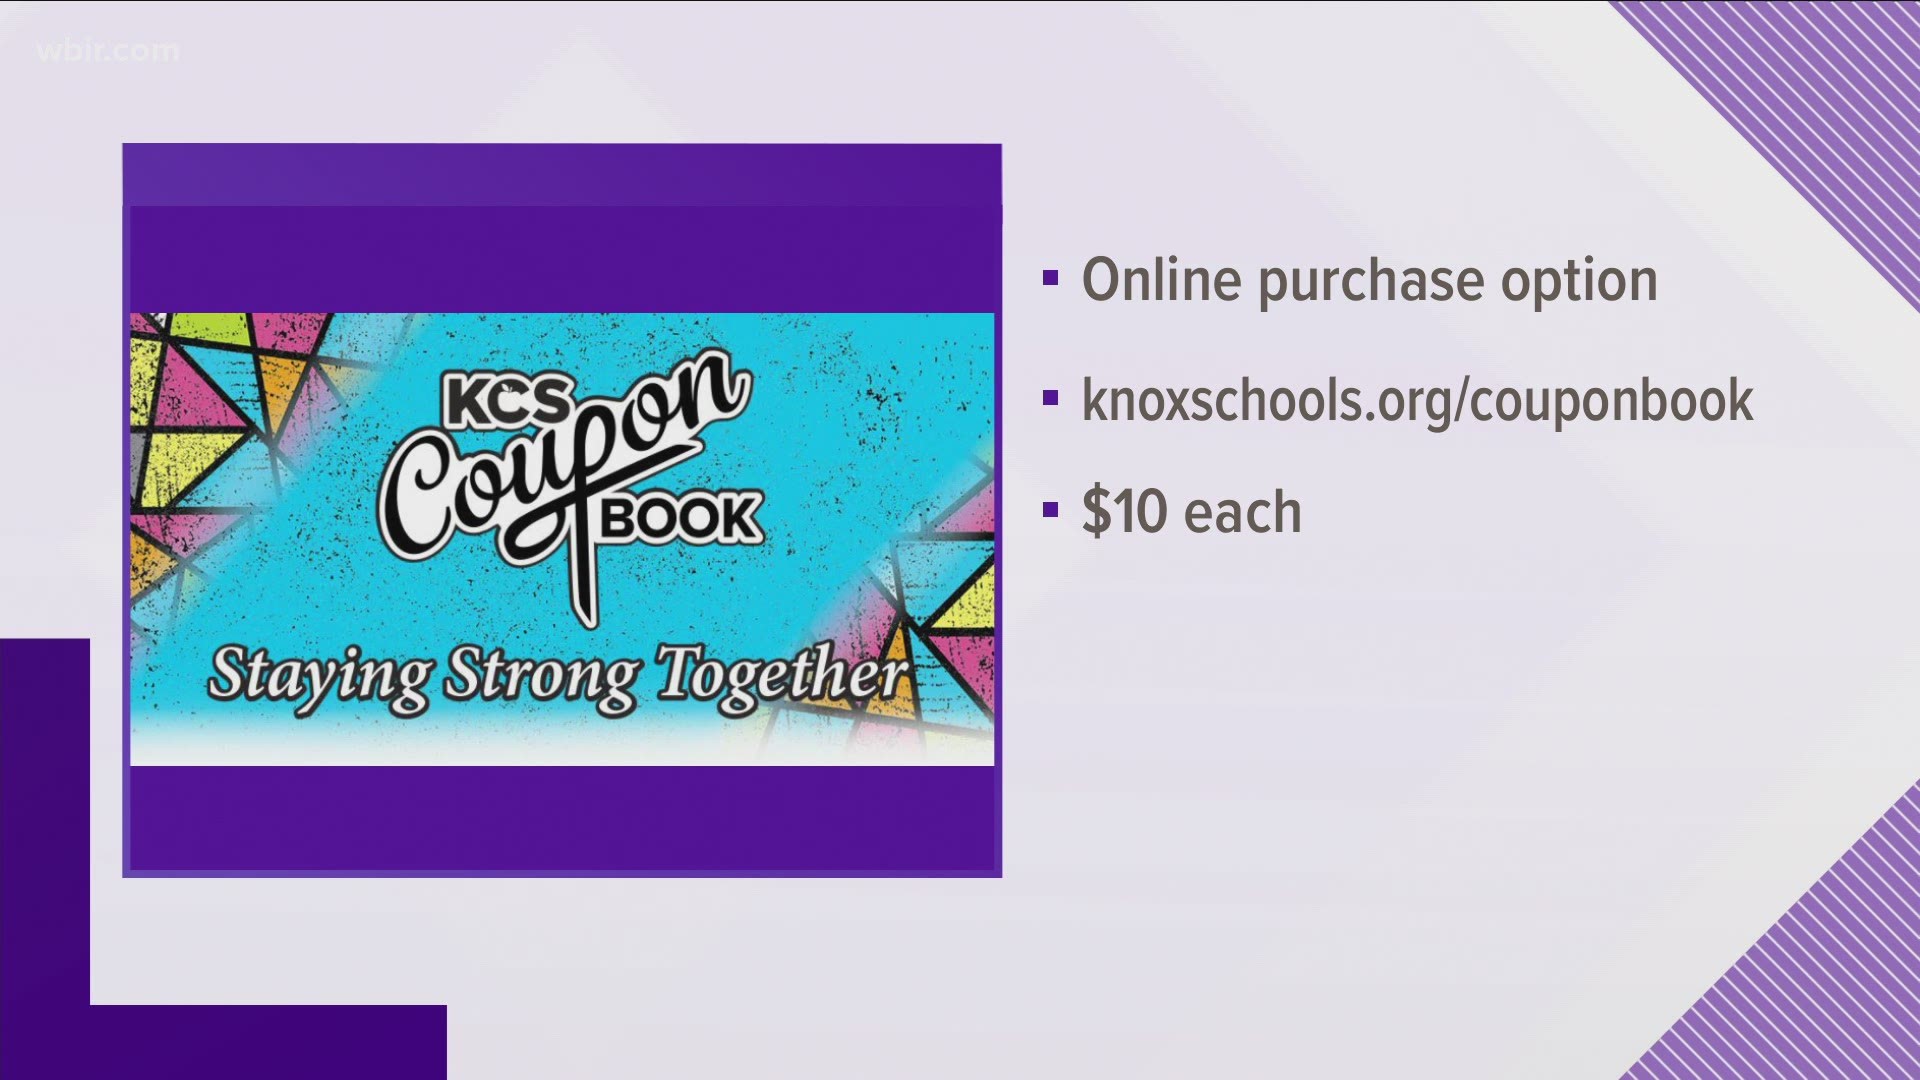 The Knox County Schools coupon book fundraiser kicks off today. It features deals from more than 200 places around the area.